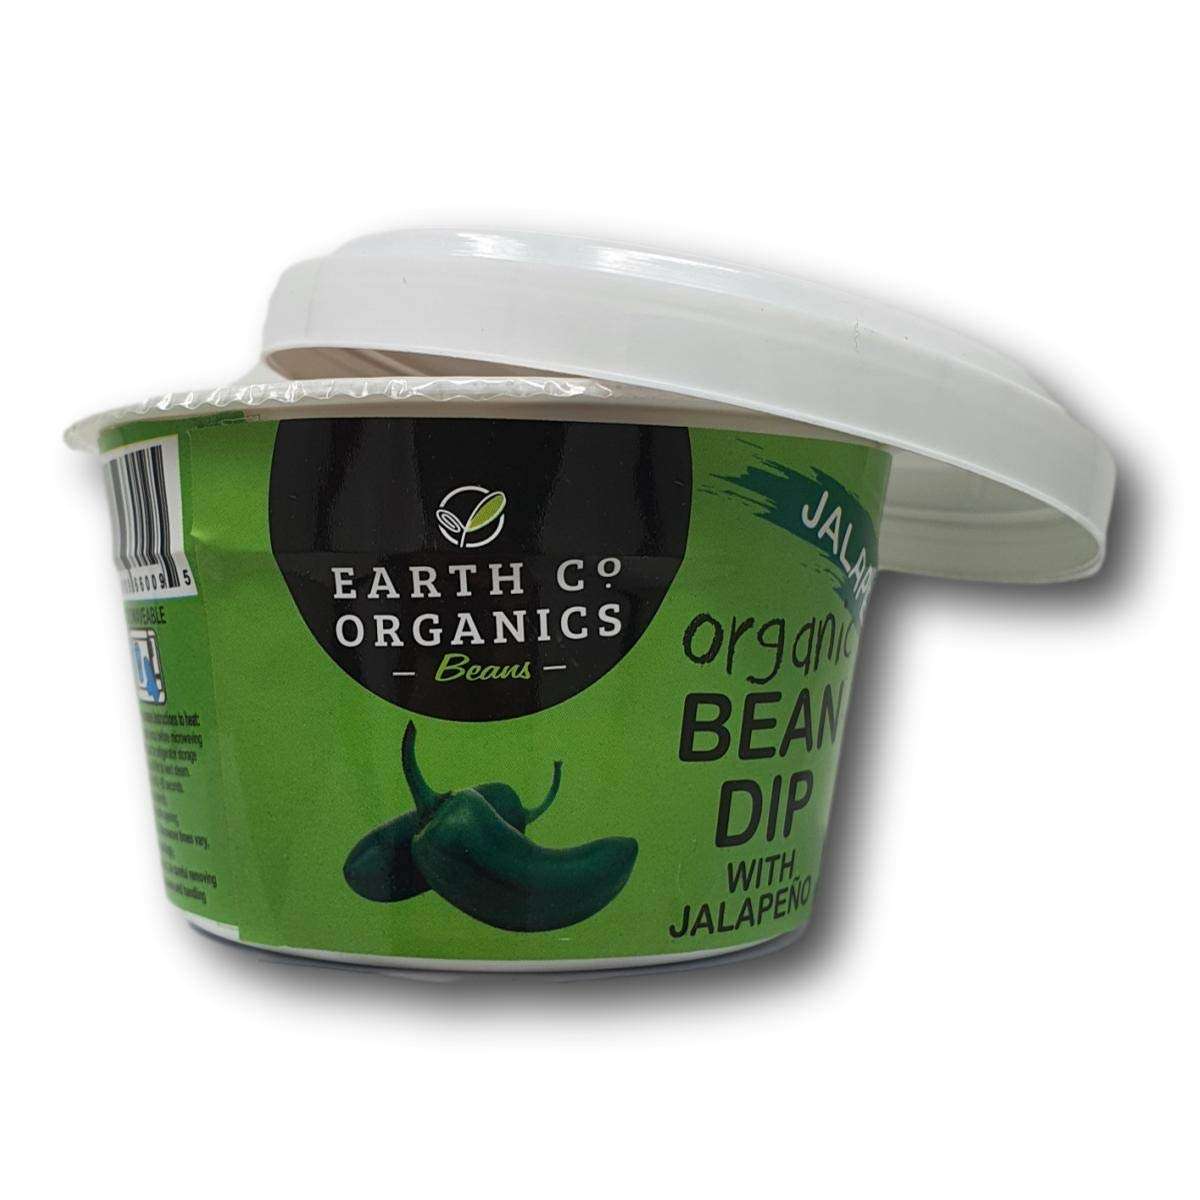 Picture of Earth Co Organics Beans KHRM00364329 11 oz Jalapeno Dip Bean